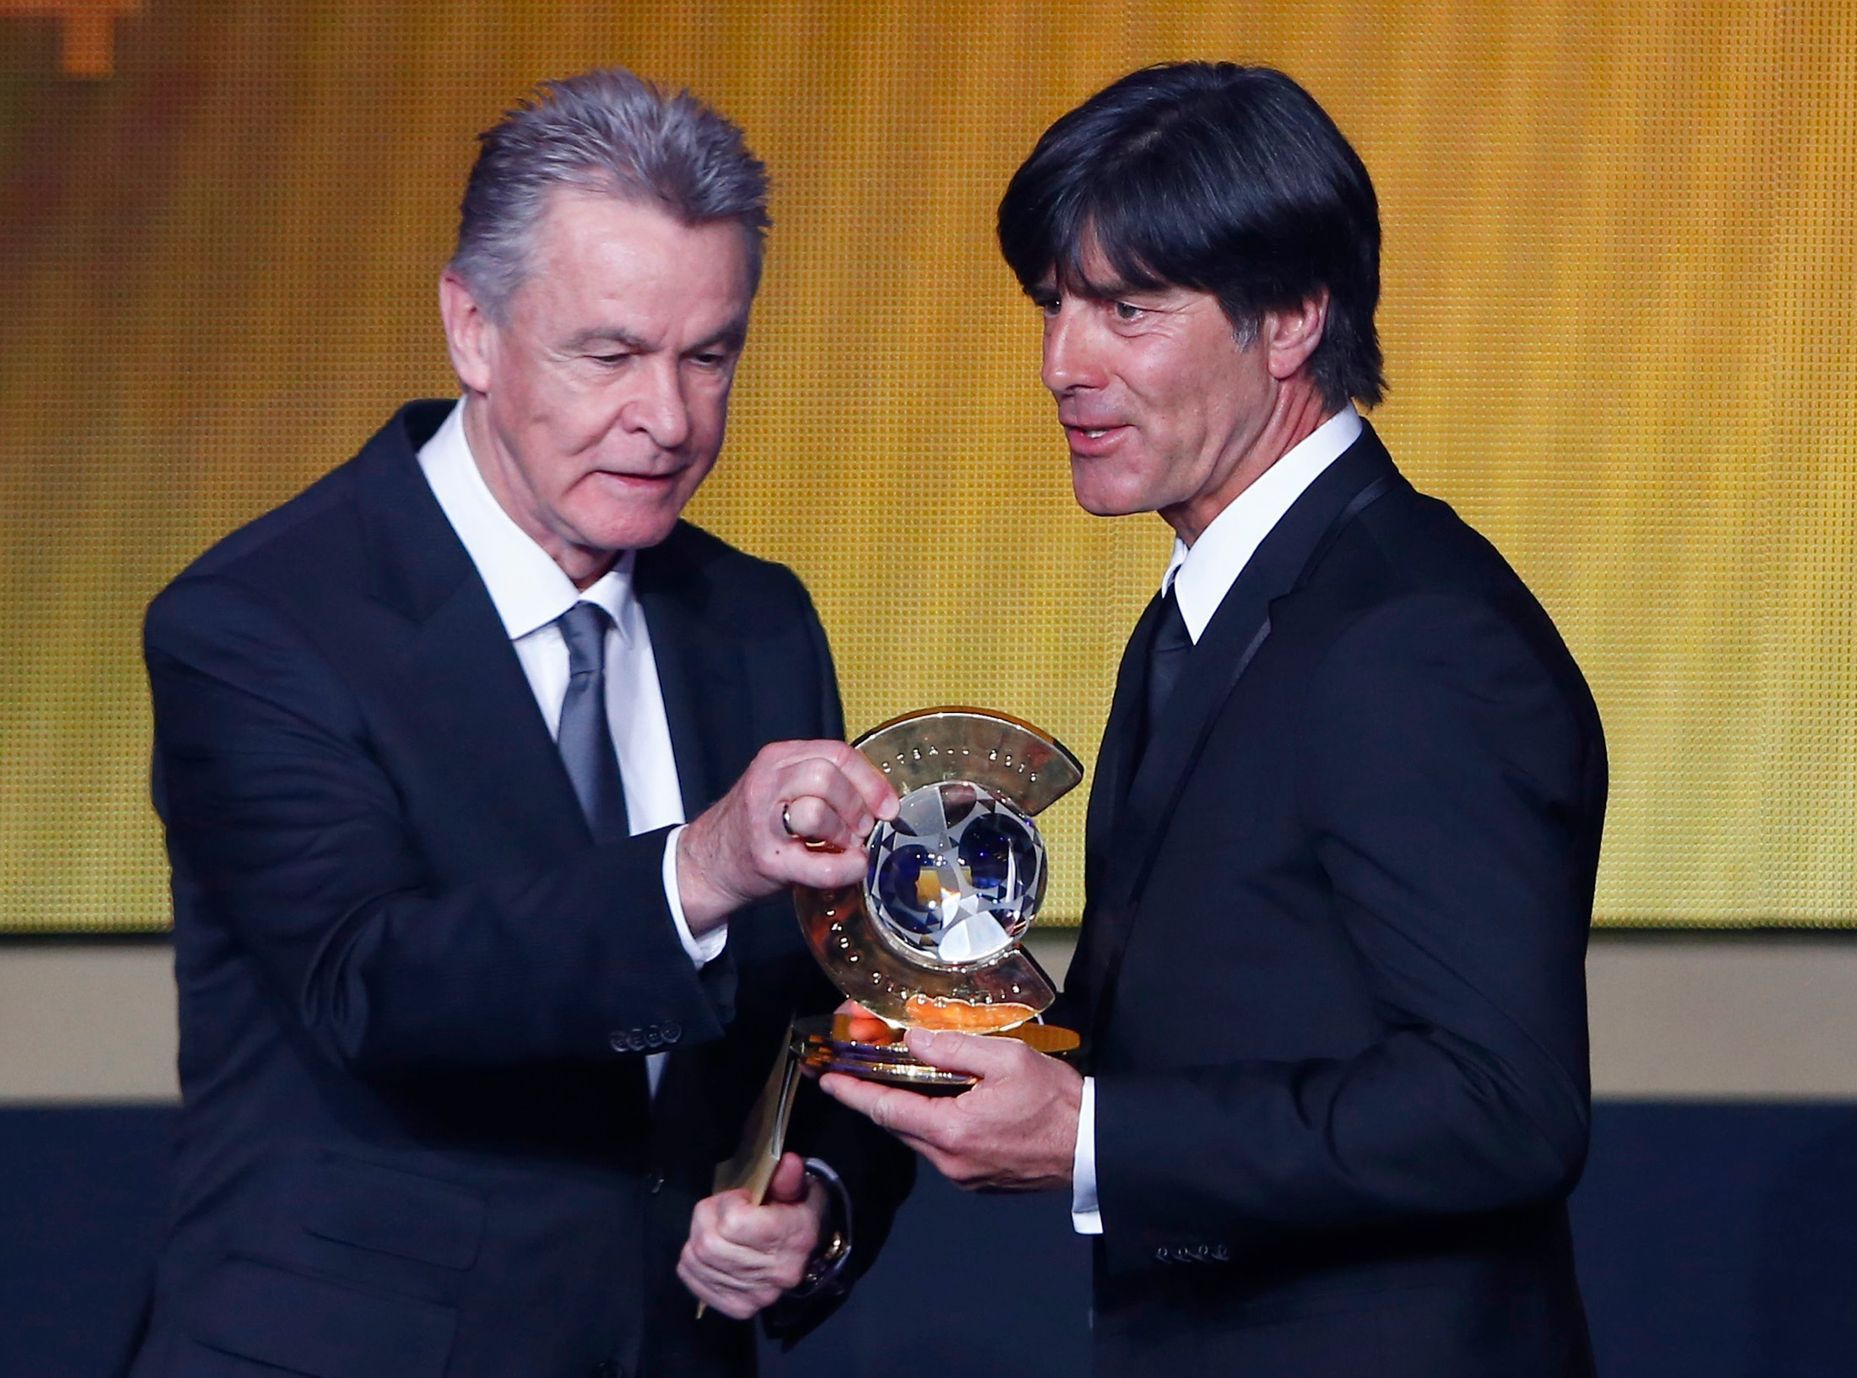 Germany coach Loew is presented FIFA Men's World Coach of the Year during FIFA Ballon d'Or 2014 soccer awards ceremony in Zurich